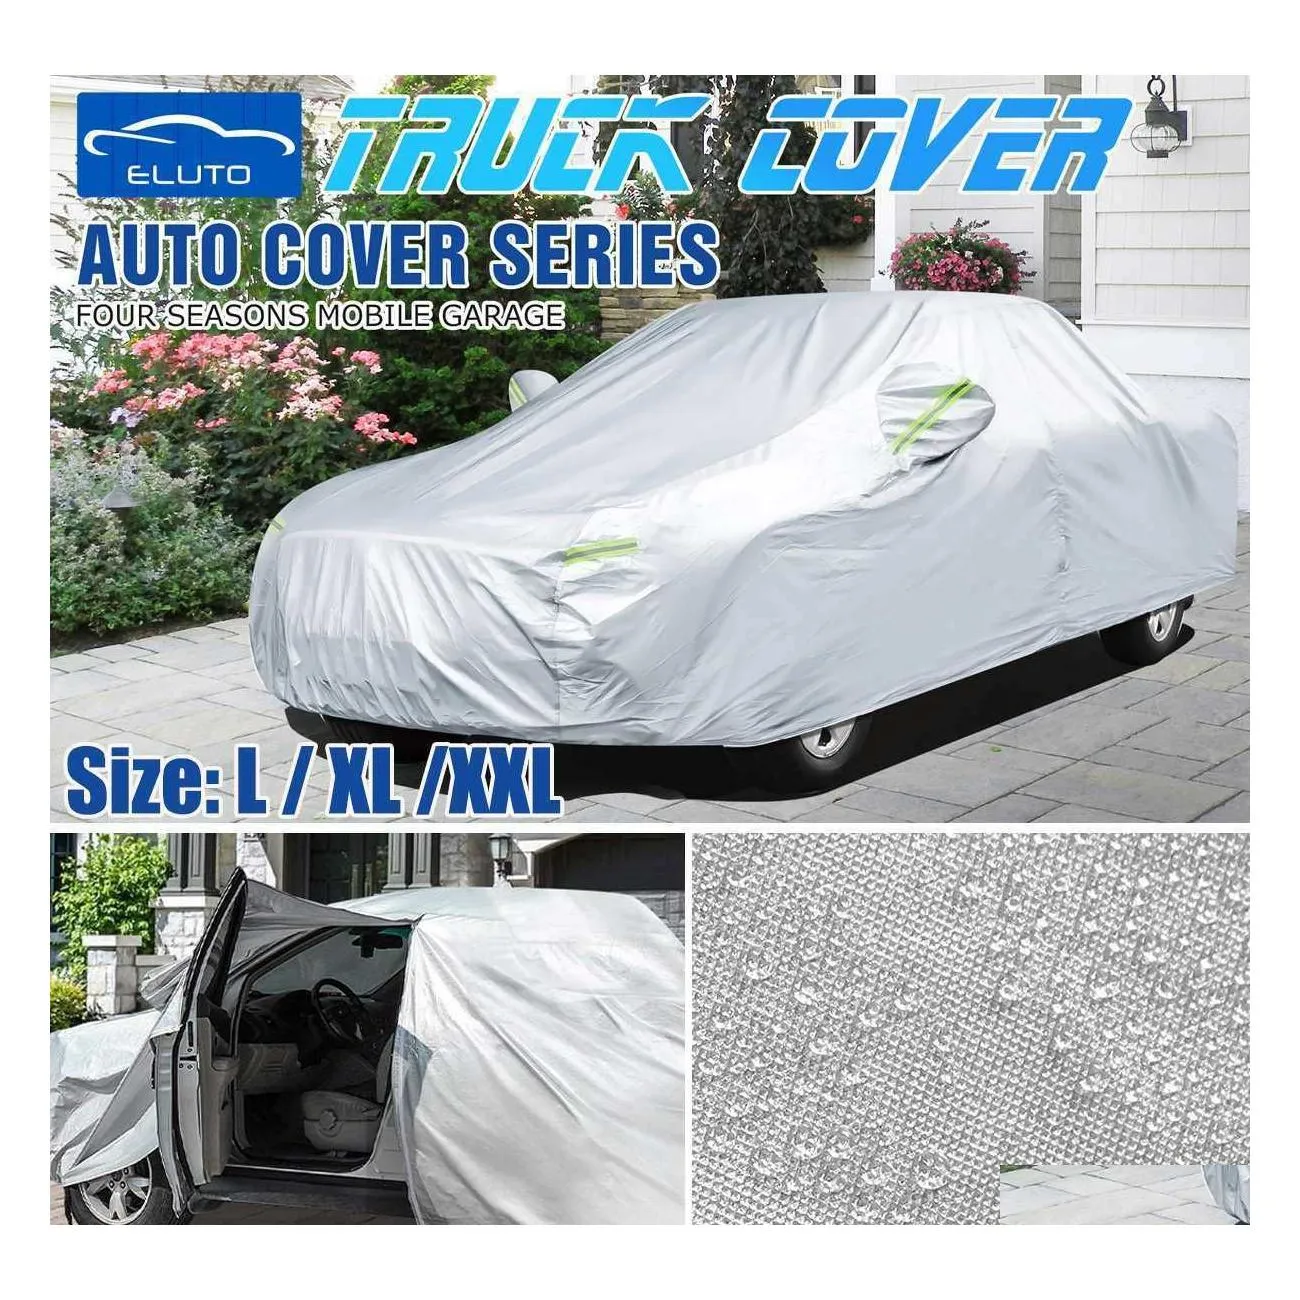 Car Sunshade Used For Pickup Truck Allcar Er Waterproof And Antitraviolet Allweather Protective Snow Antiscratch Dustproof Drop Deli Dhxwl